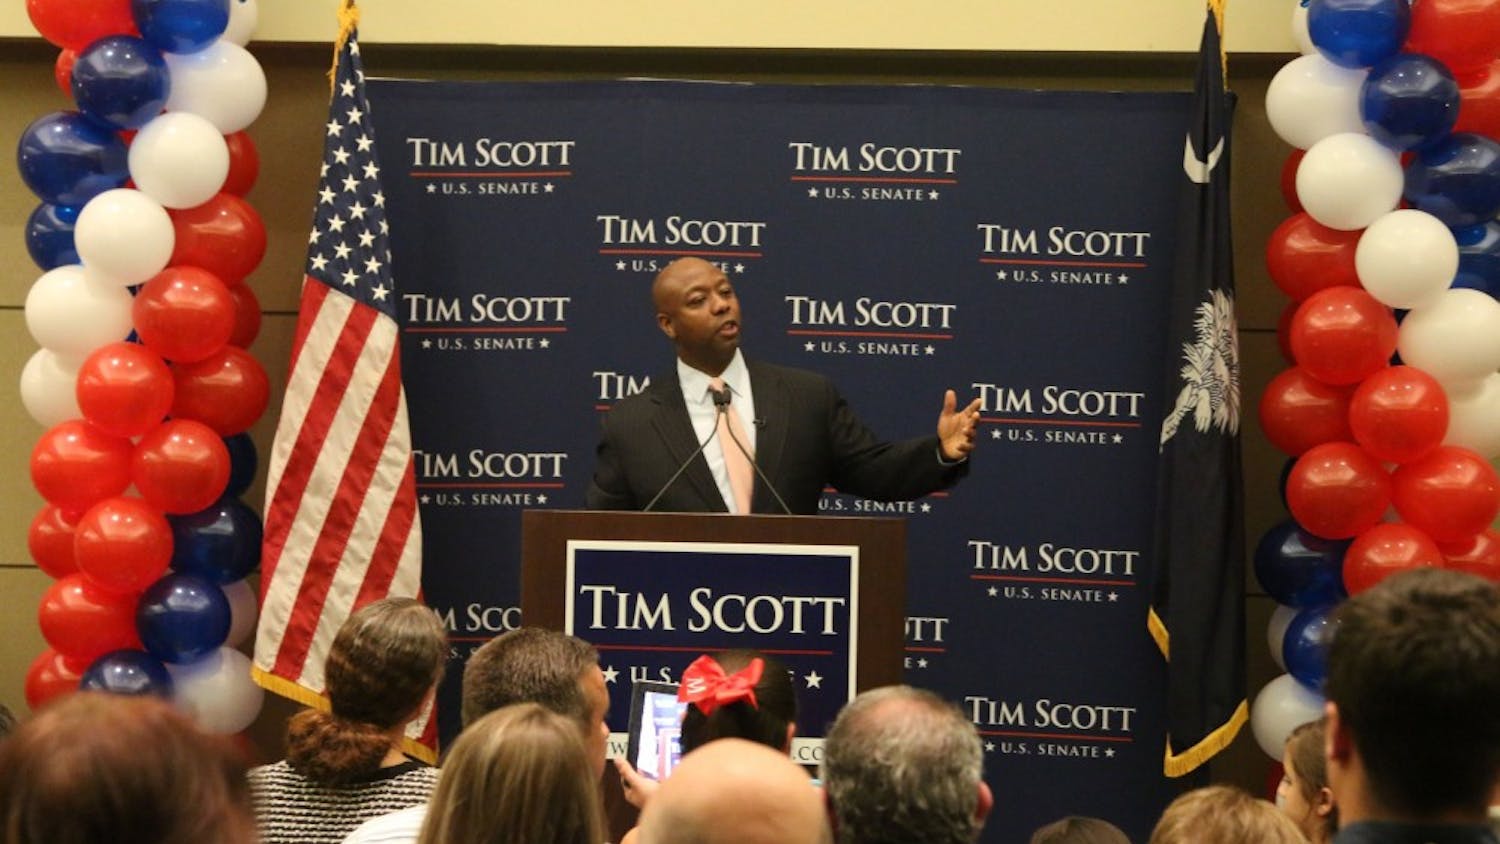 Newly-elected U.S. Sen. Tim Scott addresses the crowd at his victory party at the North Charleston Performing Arts Center in North Charleston, S.C., on Tuesday, Nov. 4, 2014. (Kim Kim Foster-Tobin/The State/MCT)